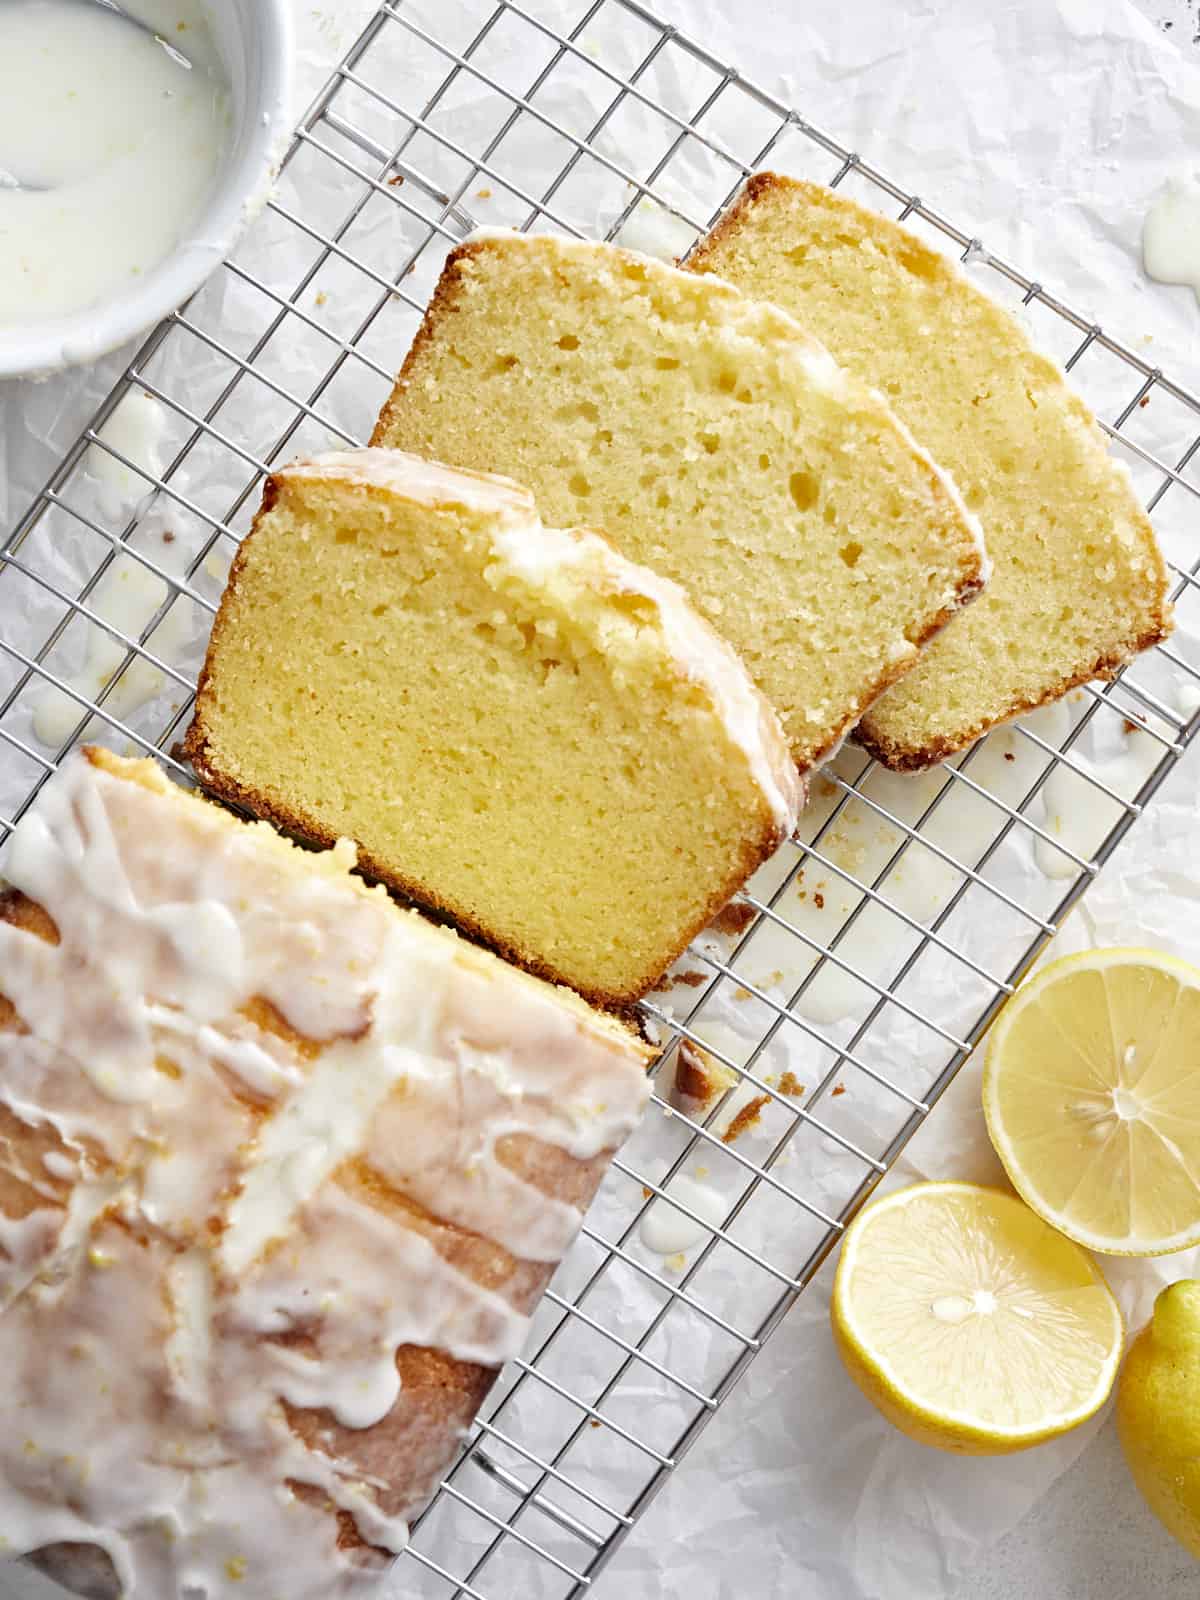 Overhead view of lemon pound cake sliced on a wire cooling rack.